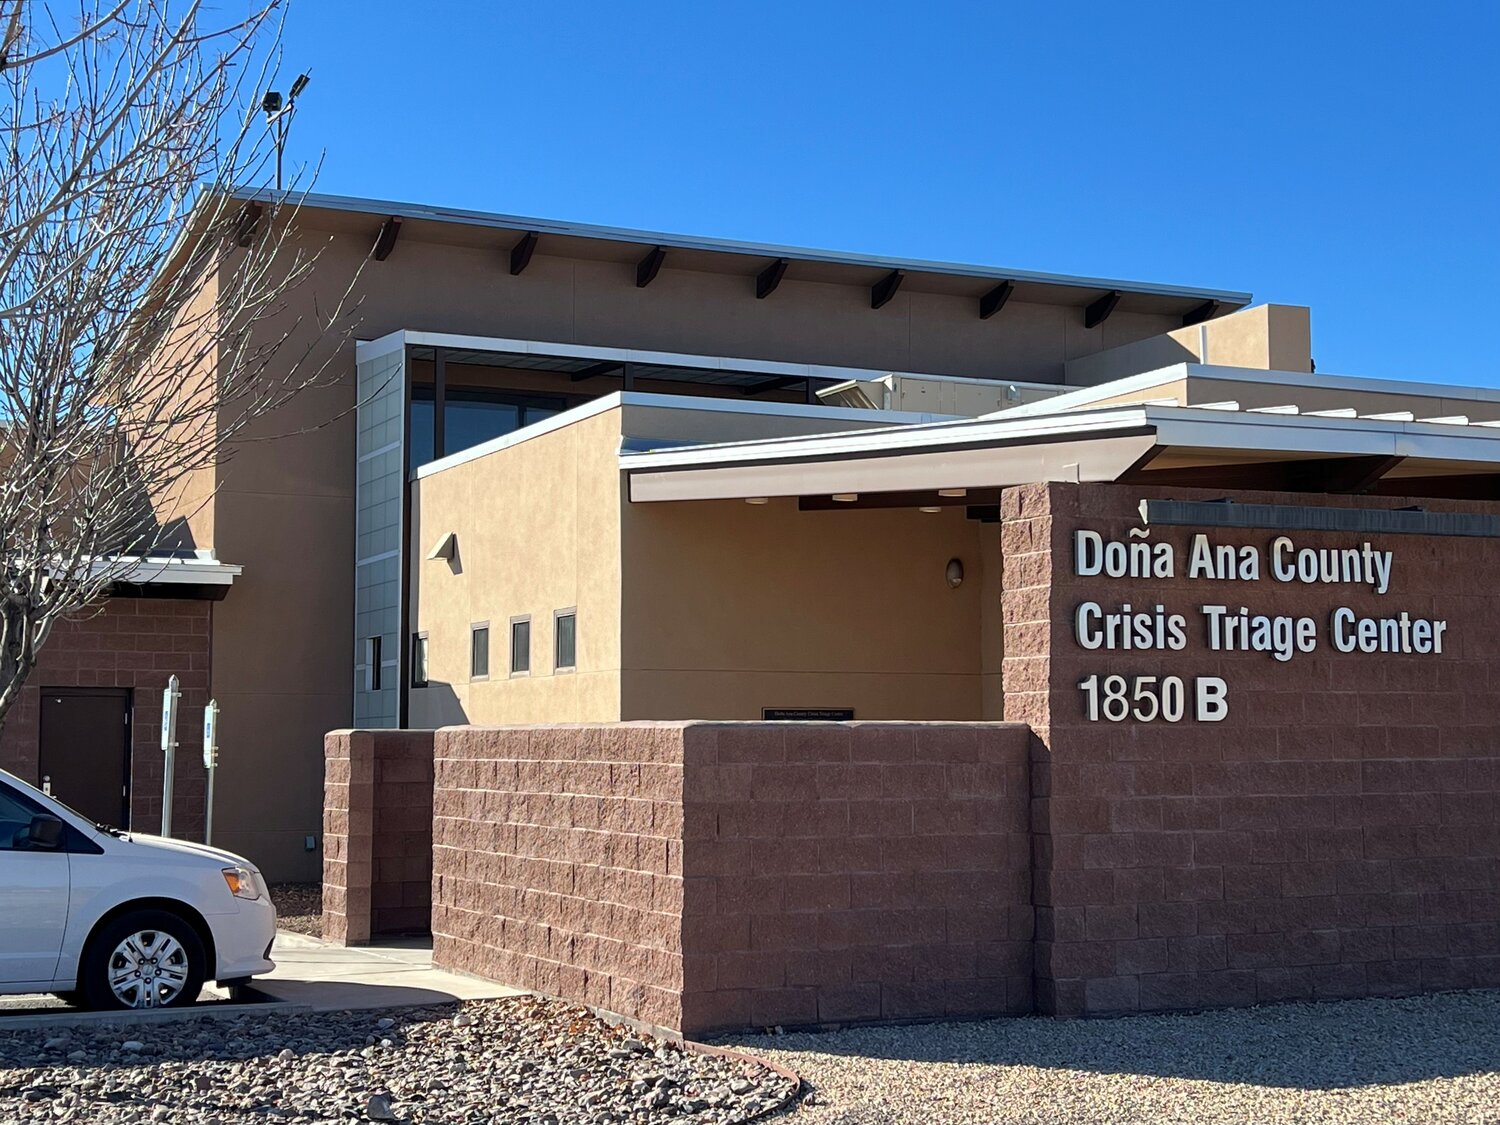 Doña Ana County Crisis Triage Center, pictured on Jan. 18.